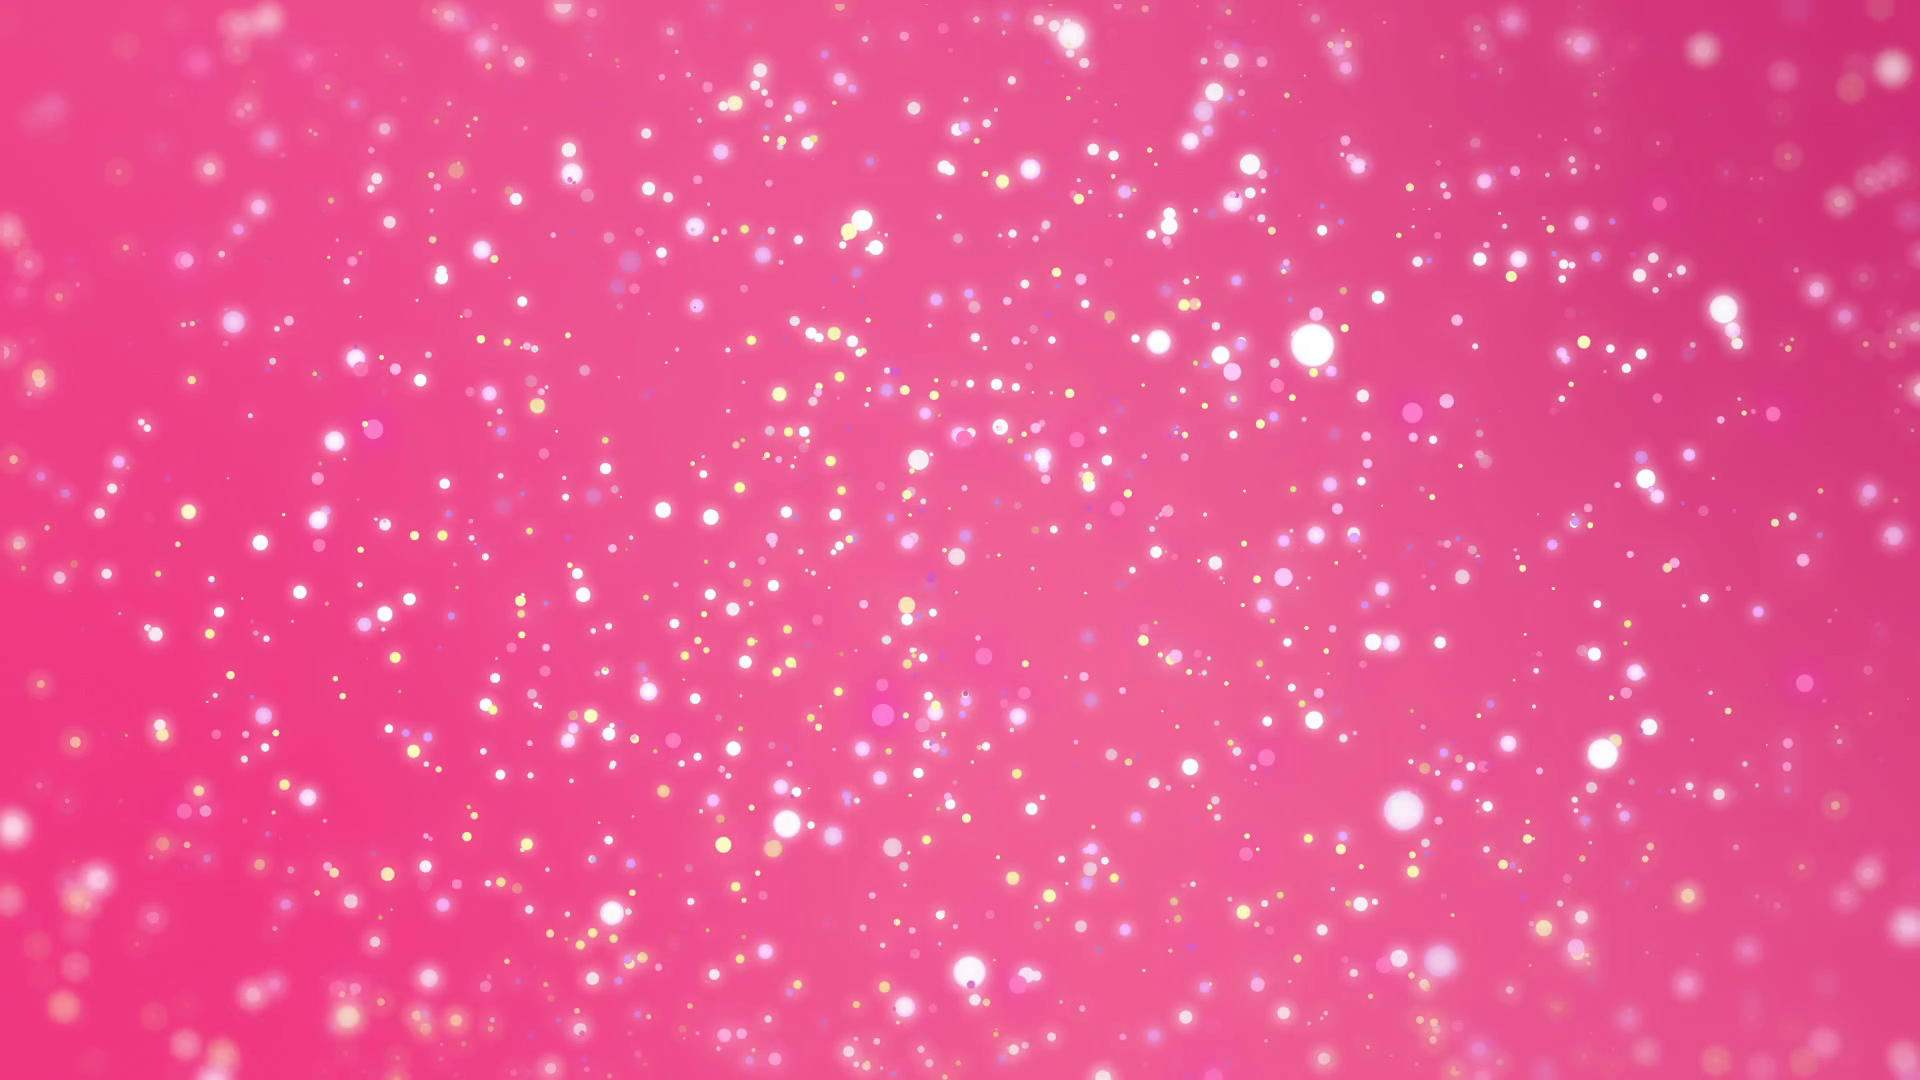 Valentines Day romantic dreamy pink glitter background with ...